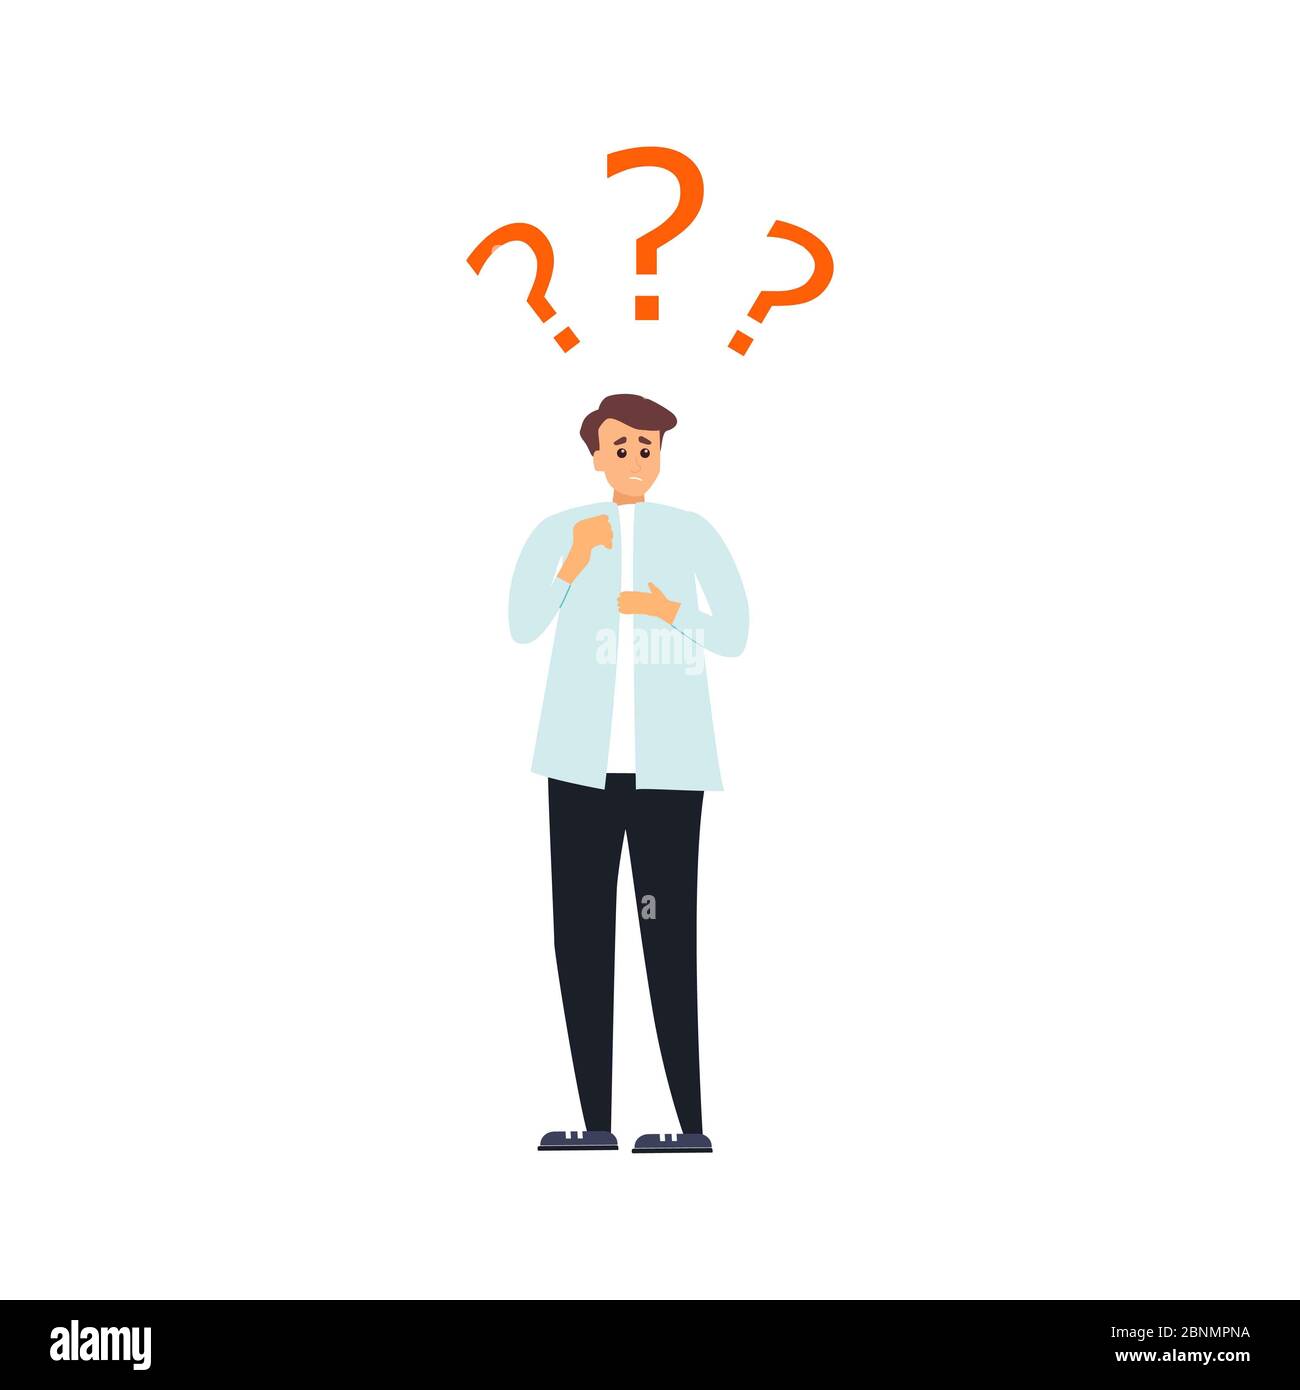 illustration business man with question marks, vector Stock Photo